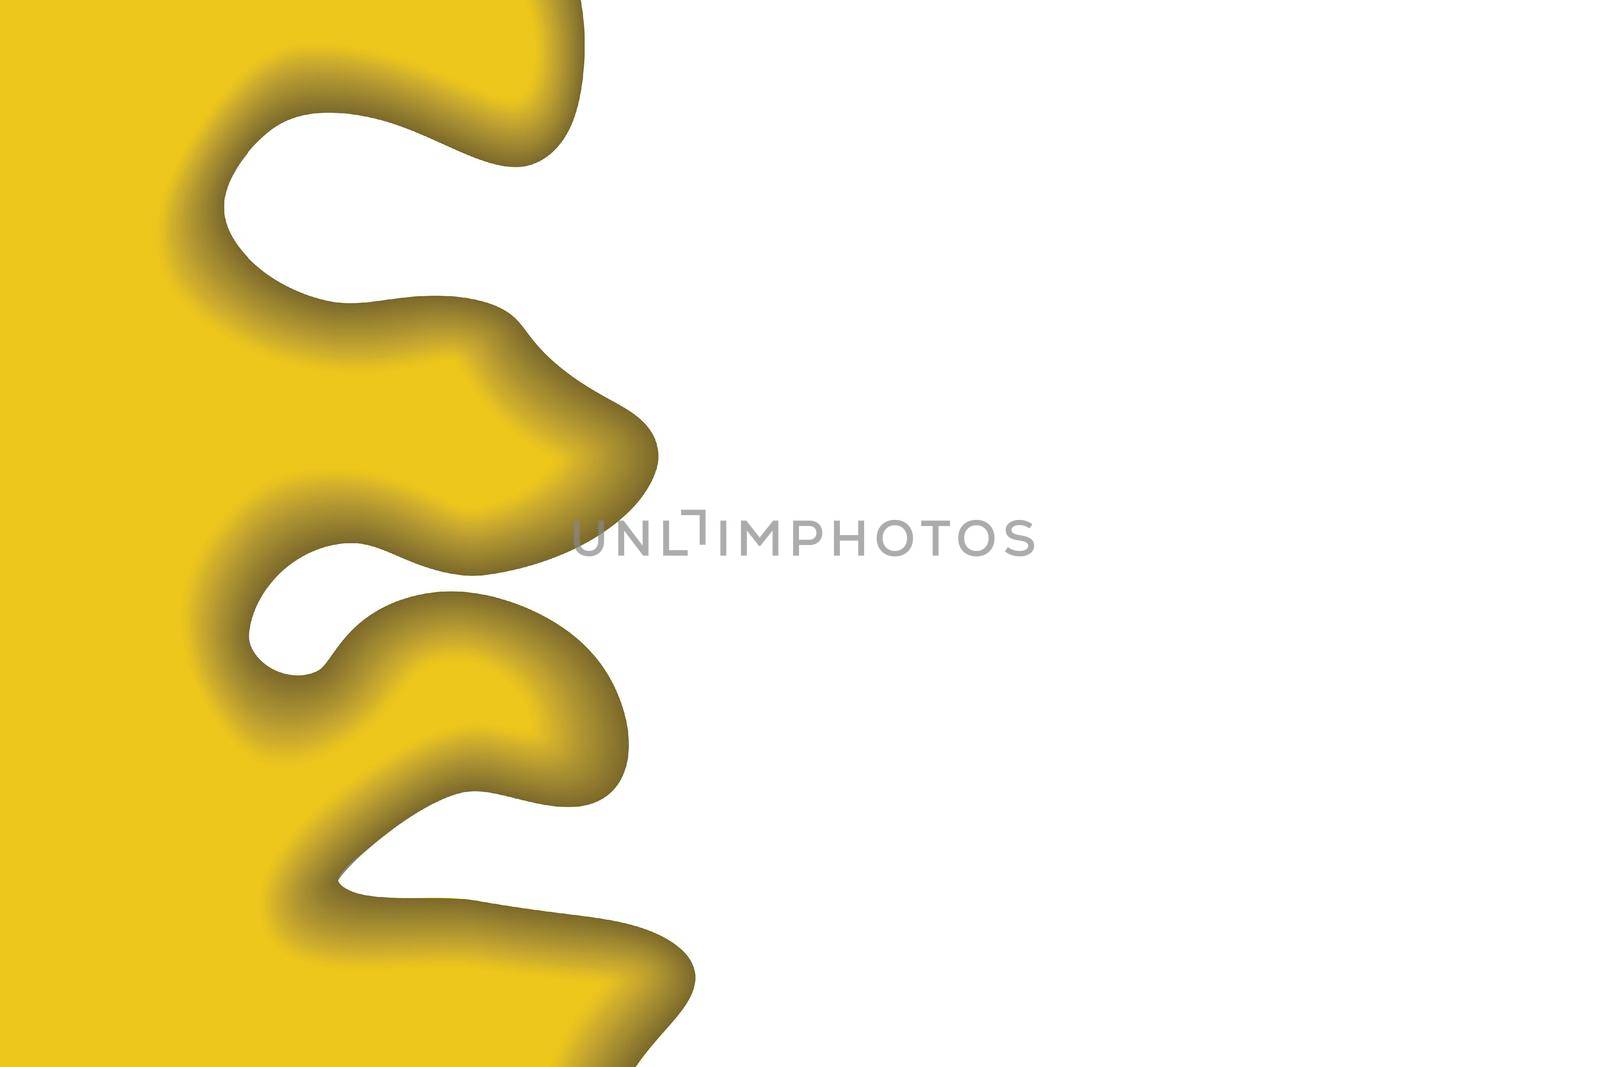 Abstract background with colorful liquid shapes. Design for poster, banner, card. White and yellow abstract illustration. 3D paper images with a subtle blend of bright colors. Copy space.